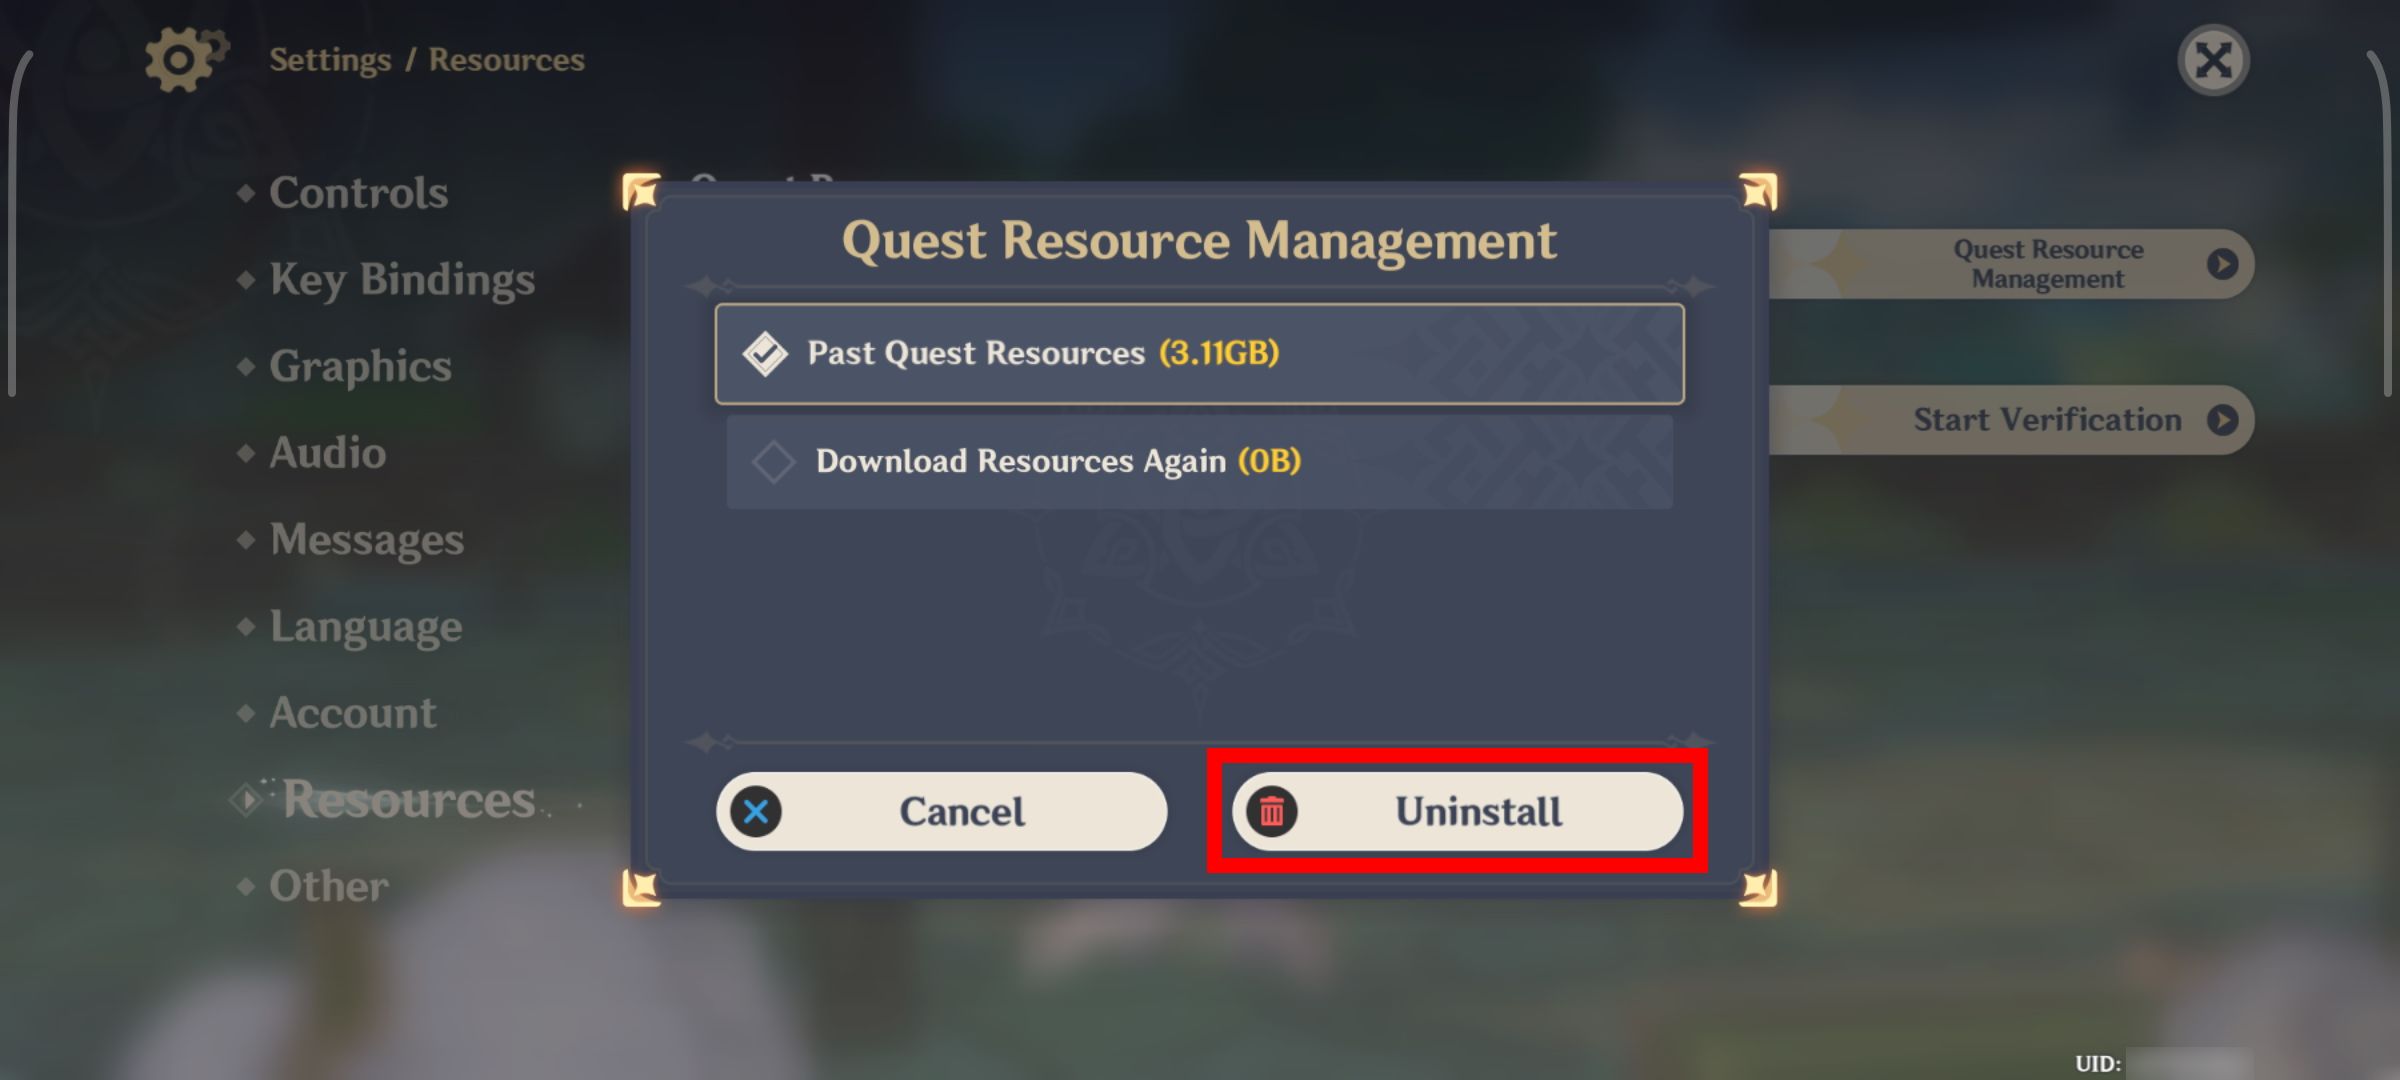 Red rectangle outline over uninstall button for quest resource management in Genshin Impact on Android